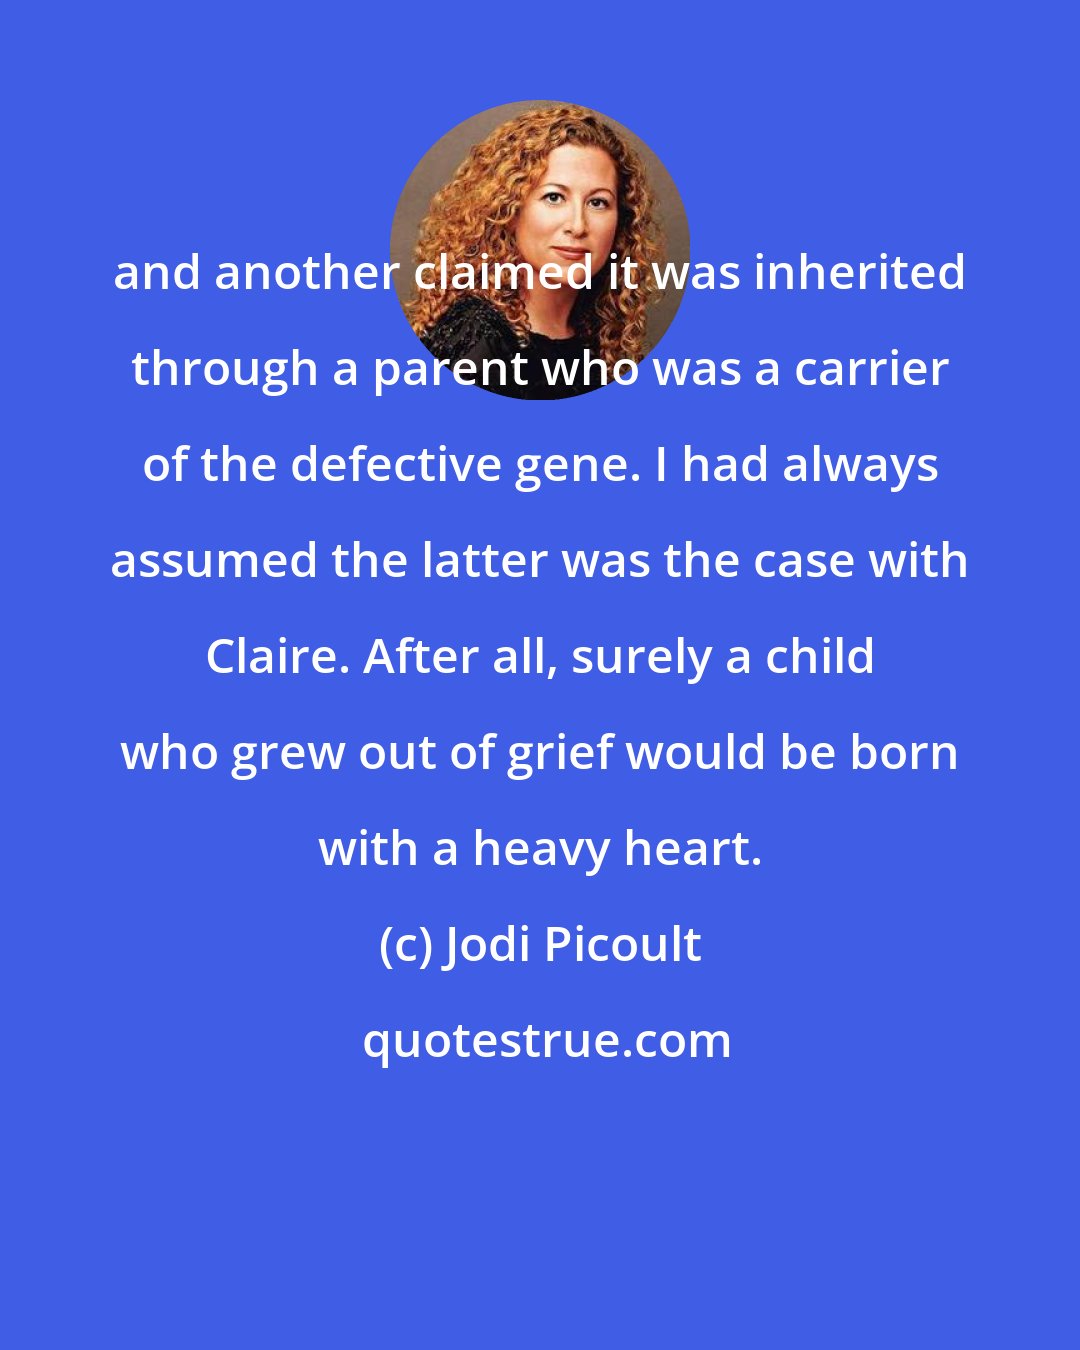 Jodi Picoult: and another claimed it was inherited through a parent who was a carrier of the defective gene. I had always assumed the latter was the case with Claire. After all, surely a child who grew out of grief would be born with a heavy heart.